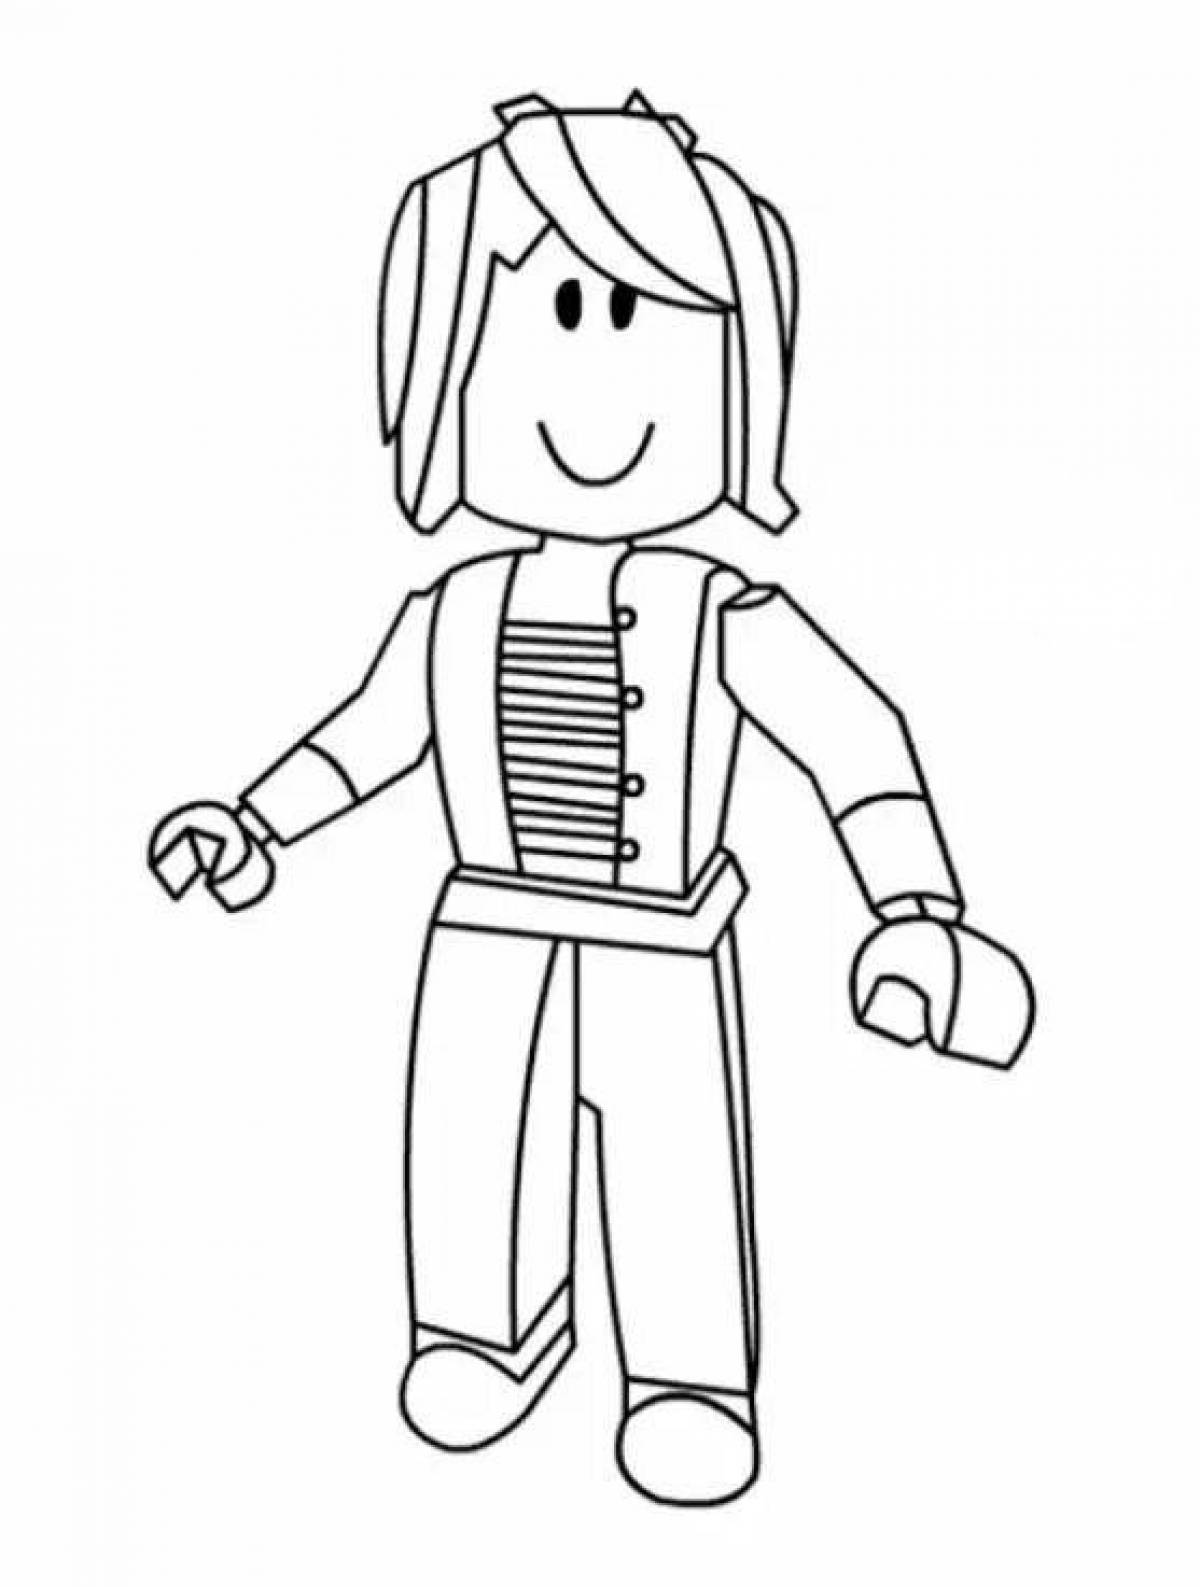 Roblox bright face coloring page